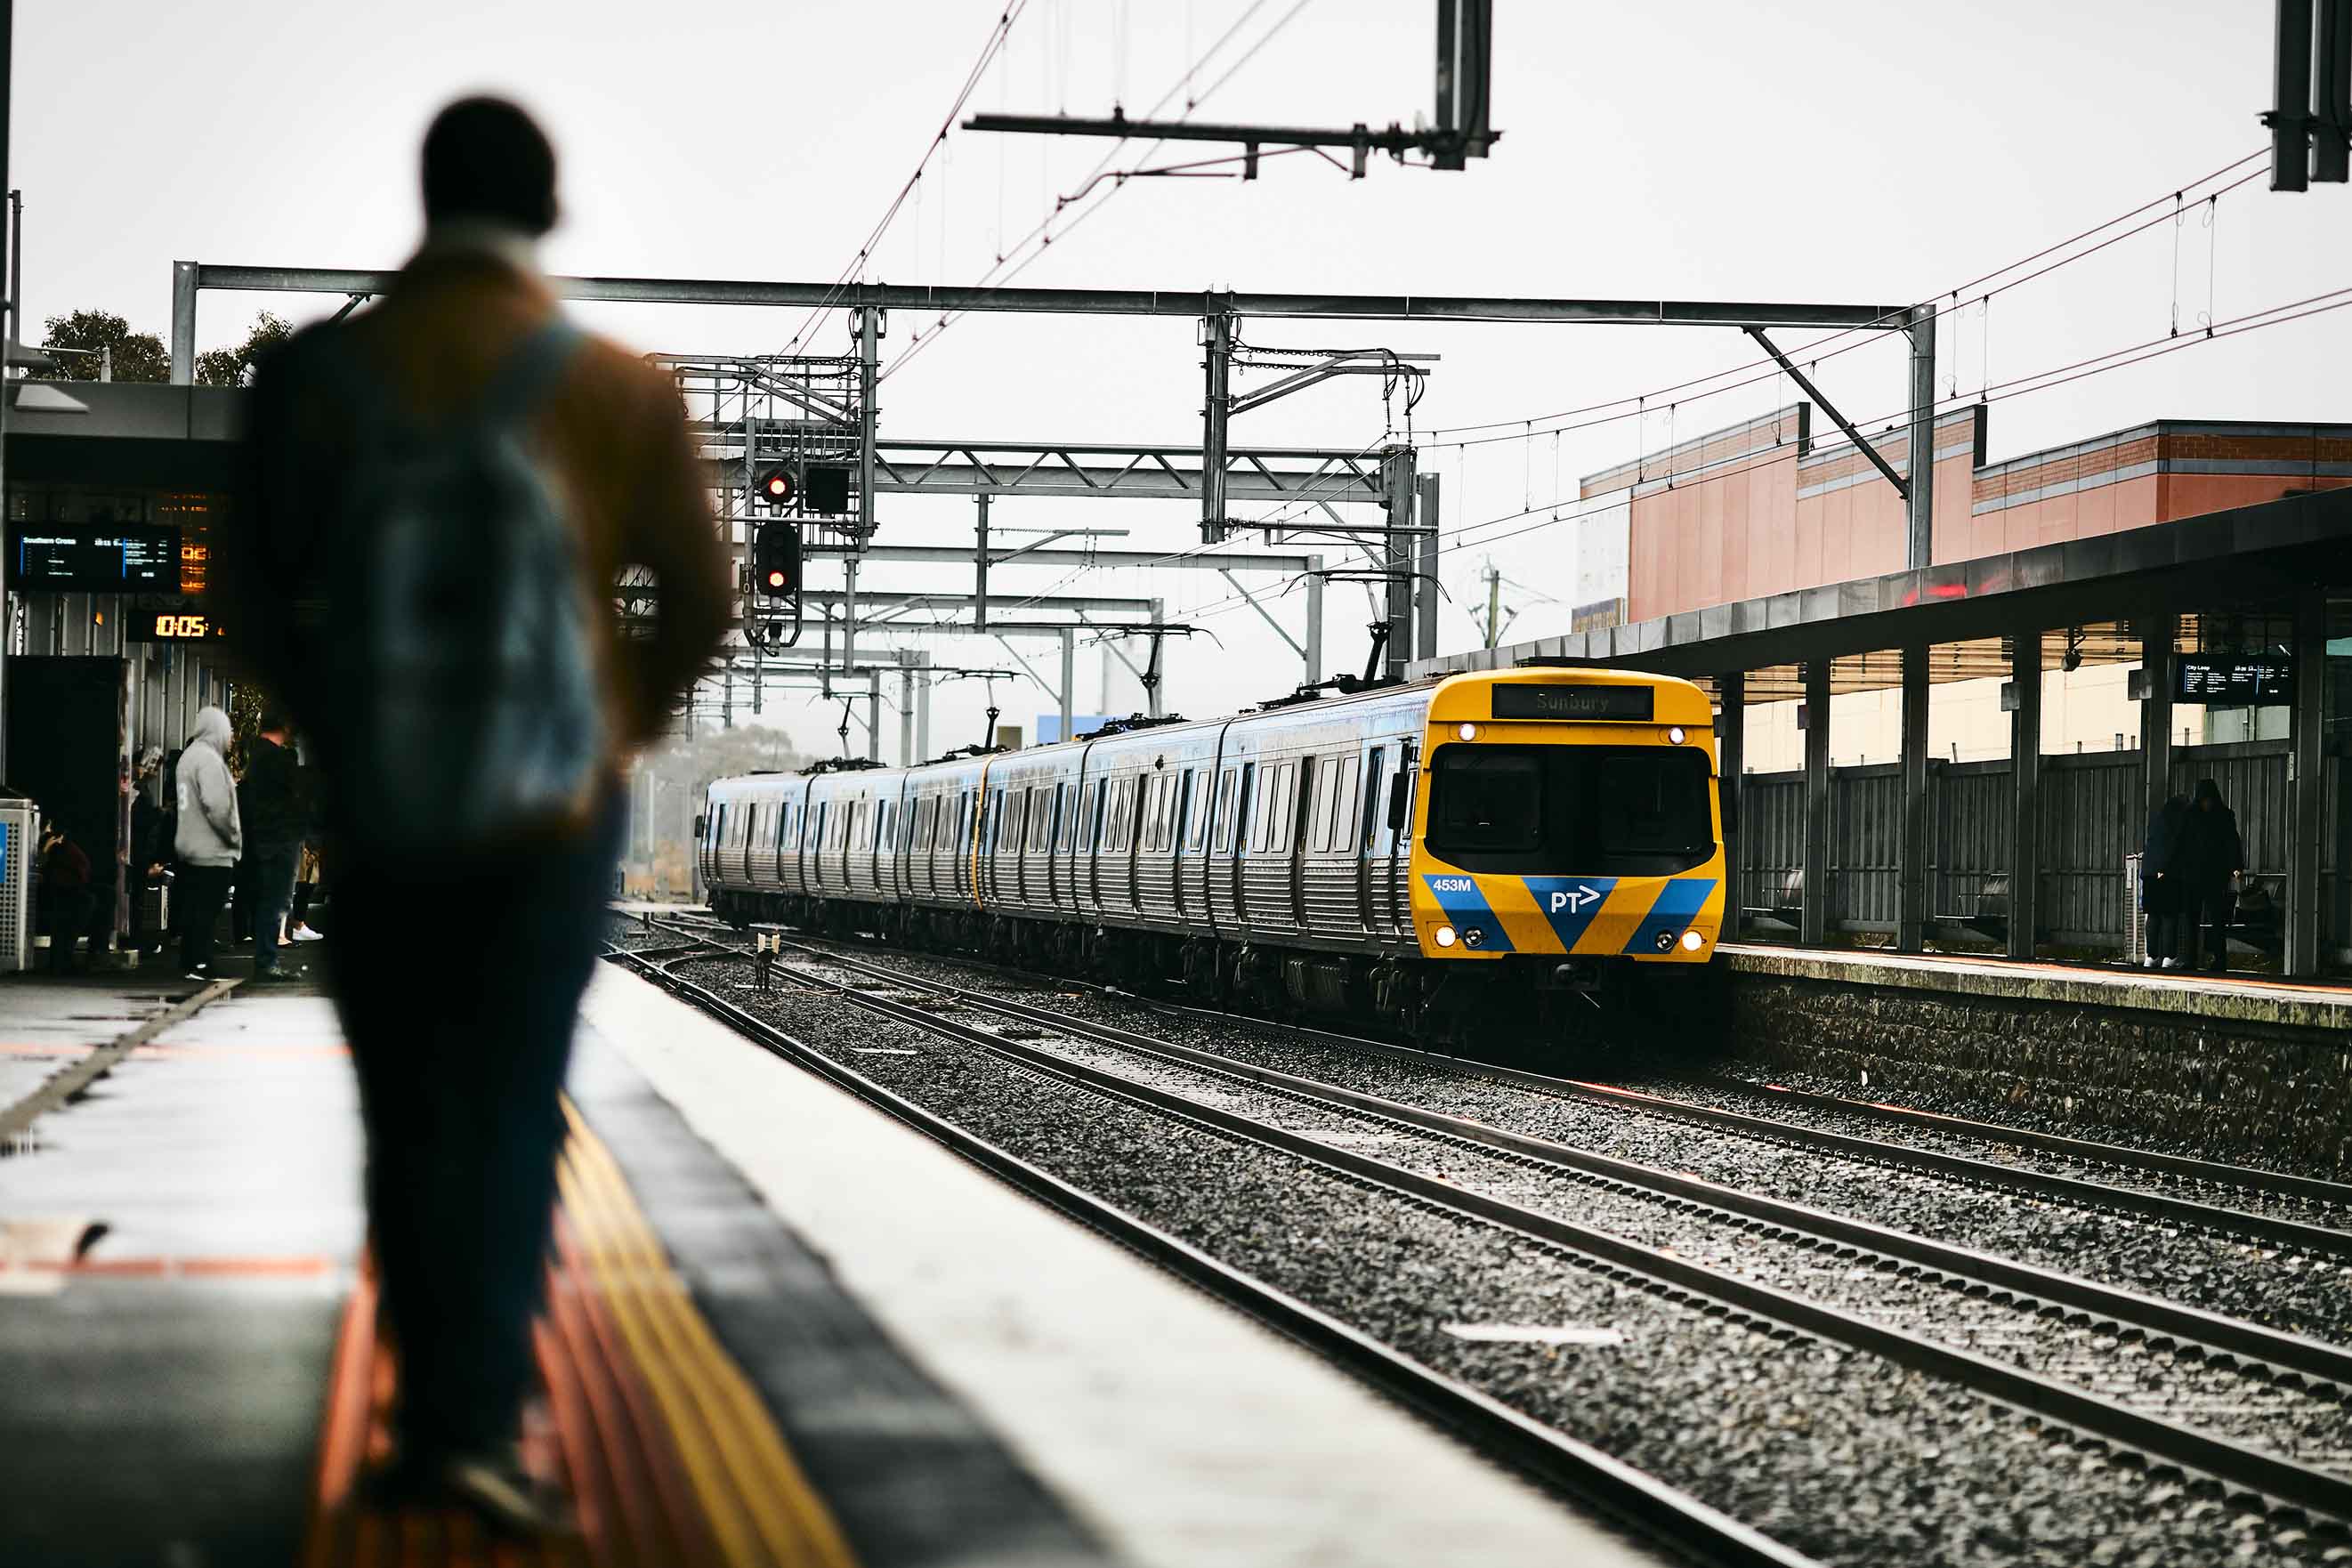 Image shows a person walking on a station platform in the foreground. In the background is a train on the Sunbury line as it pulls into a station. 